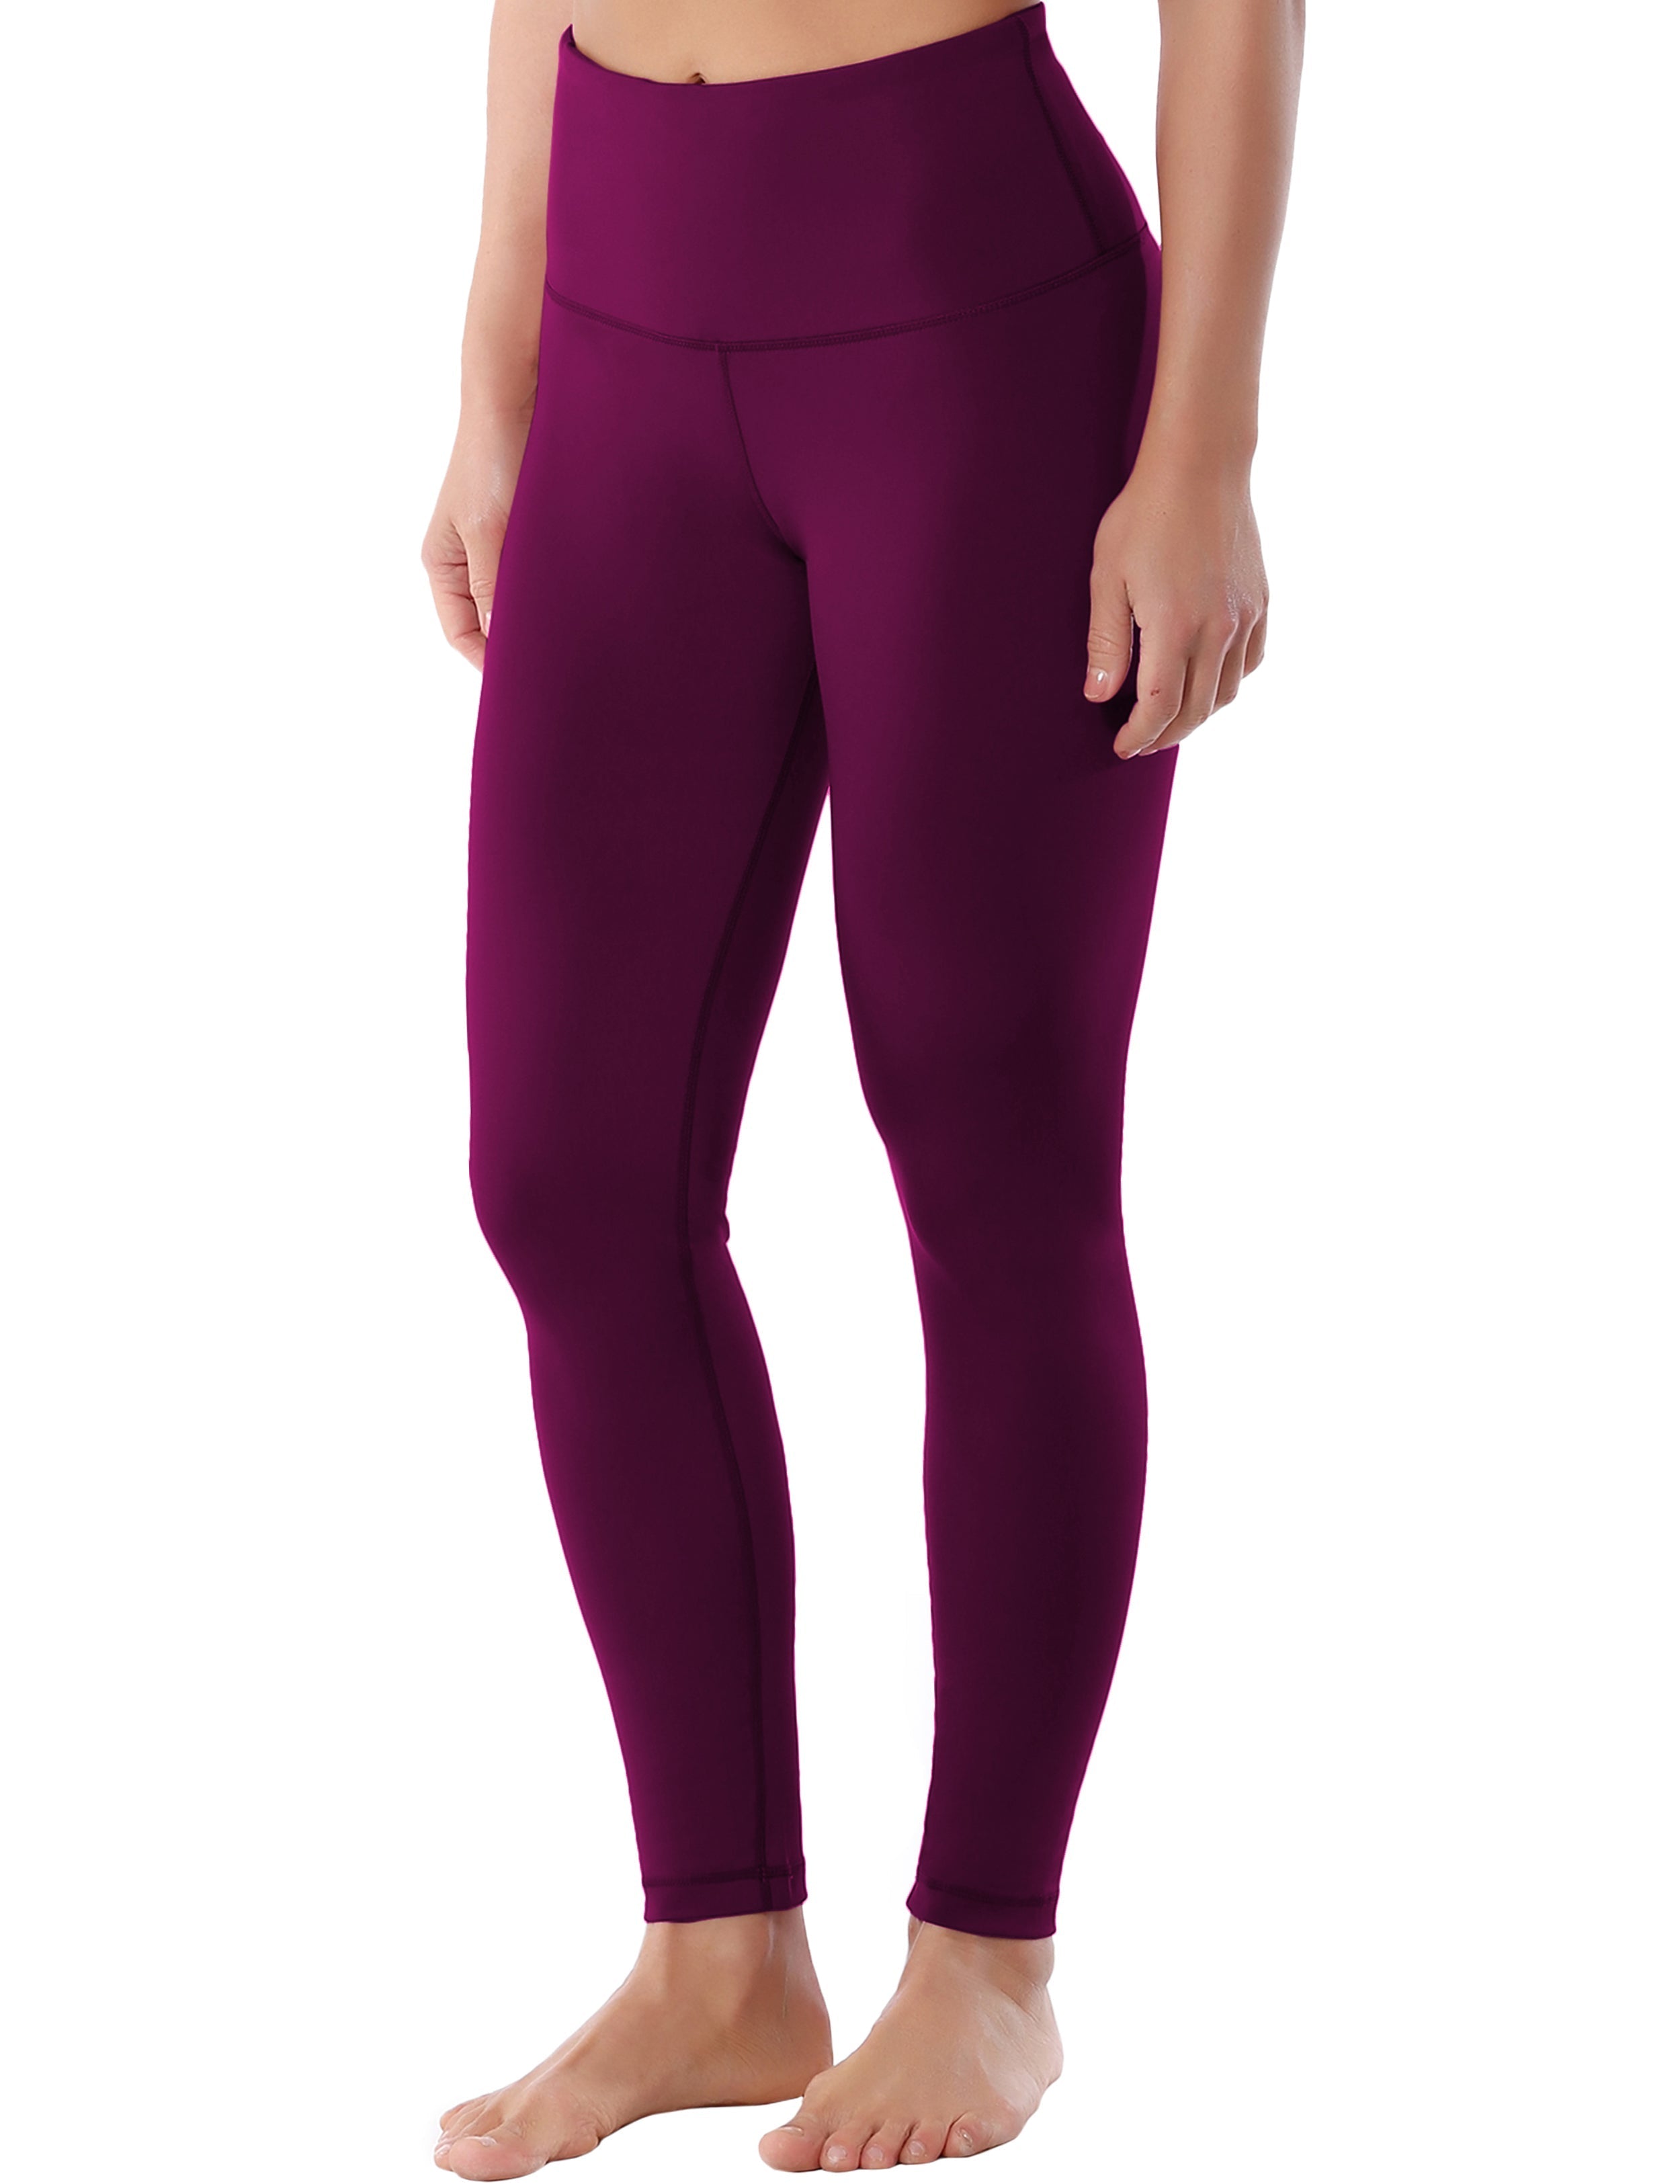 High Waist yogastudio Pants grapevine 75%Nylon/25%Spandex Fabric doesn't attract lint easily 4-way stretch No see-through Moisture-wicking Tummy control Inner pocket Four lengths